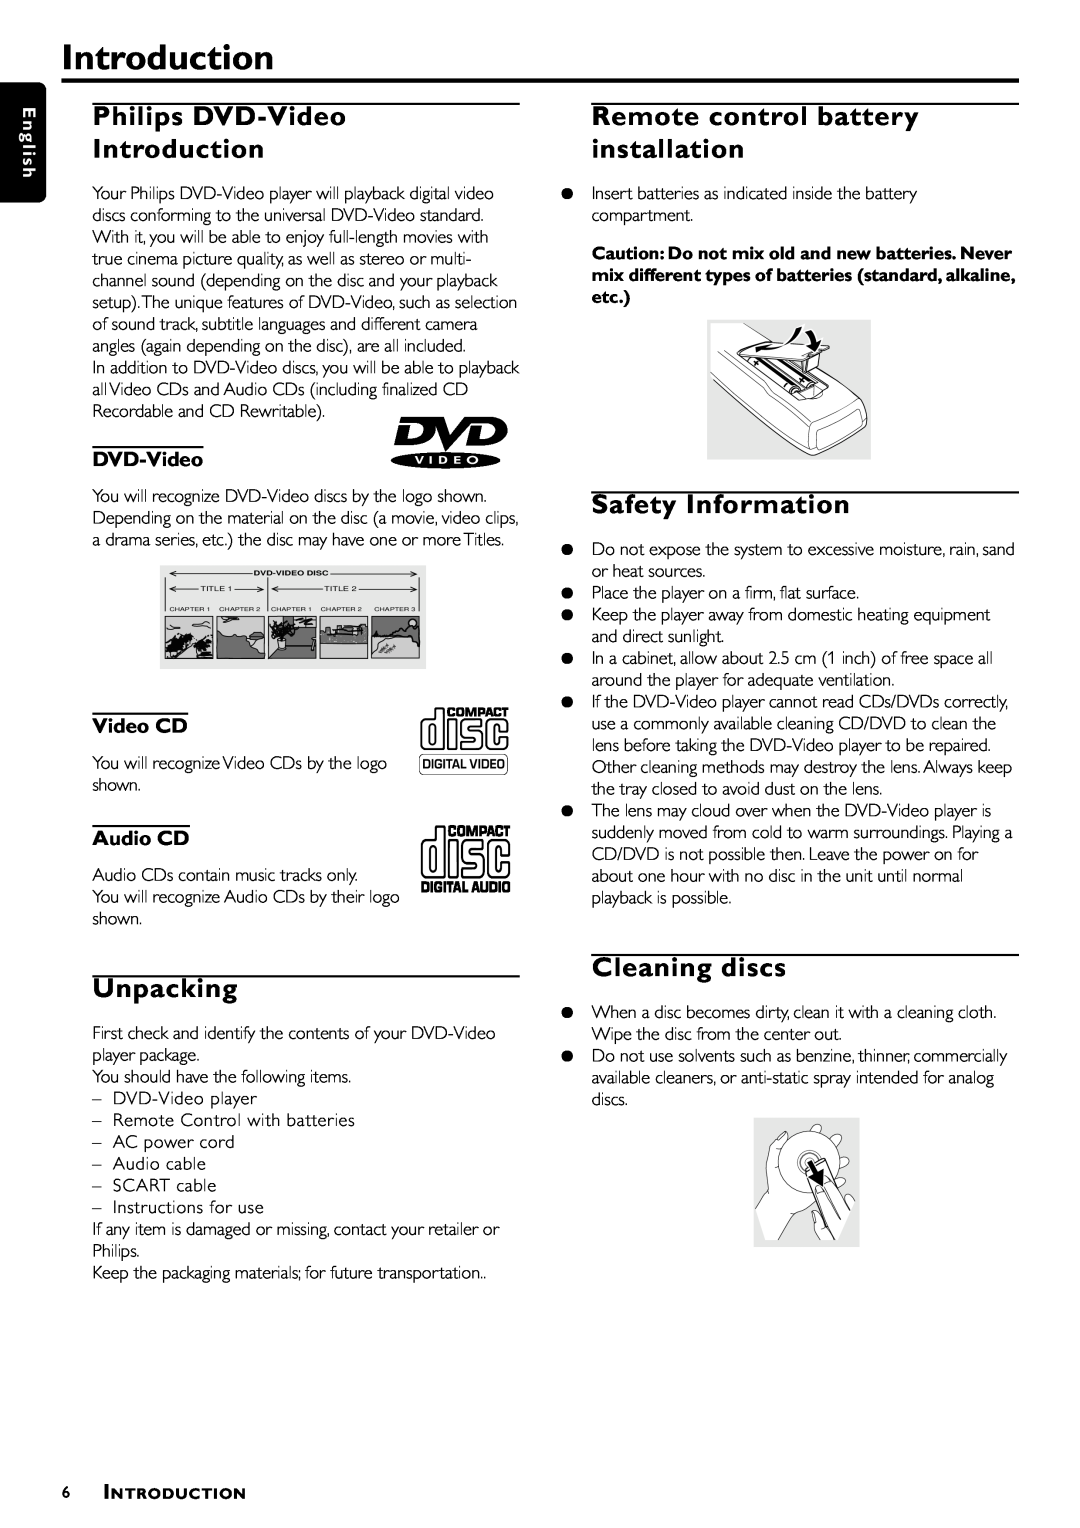 Philips DVD957/G55 Philips DVD-Video Introduction, Remote control battery installation, Safety Information, Unpacking 